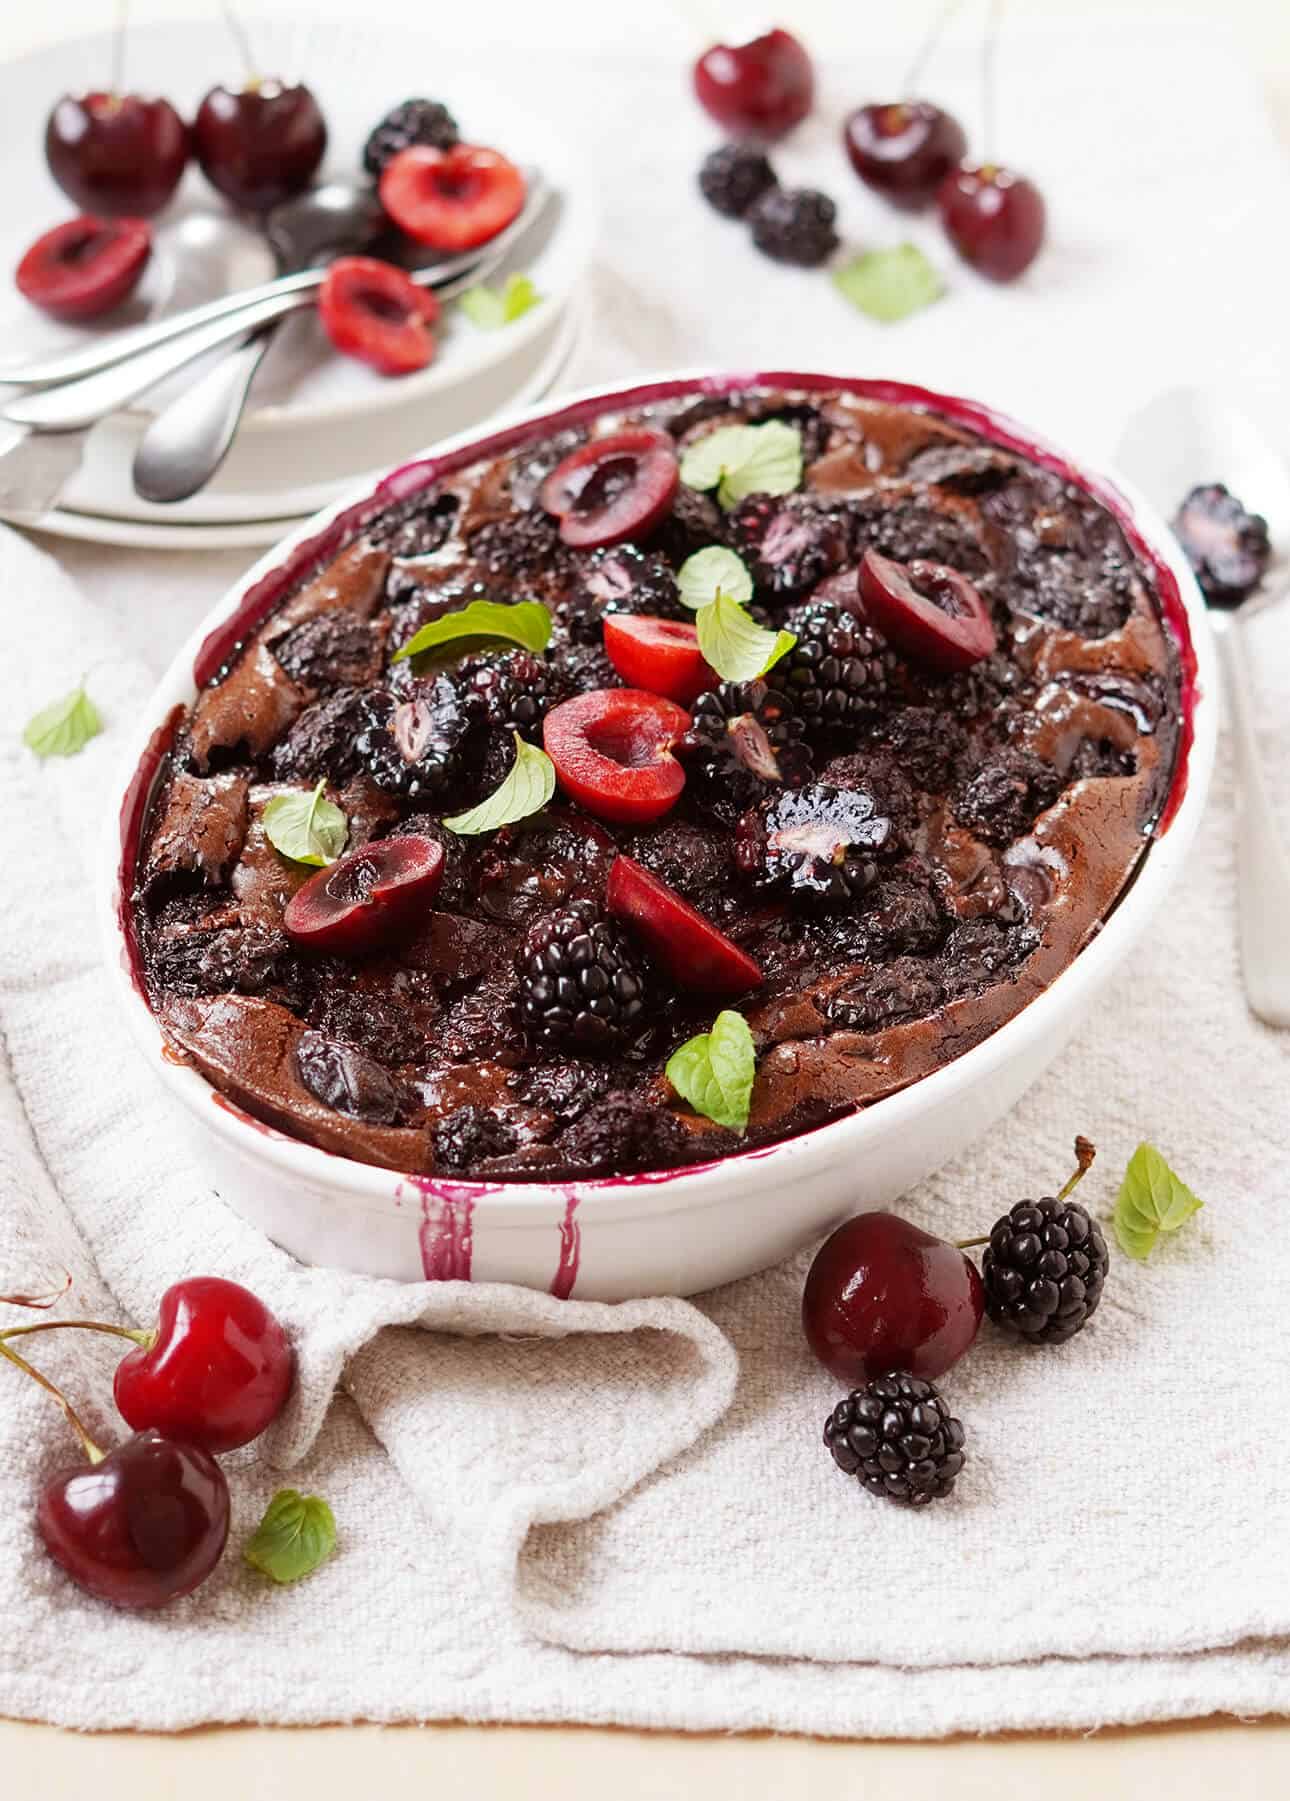 Blackberry, Cherry, and Chocolate Clafoutis